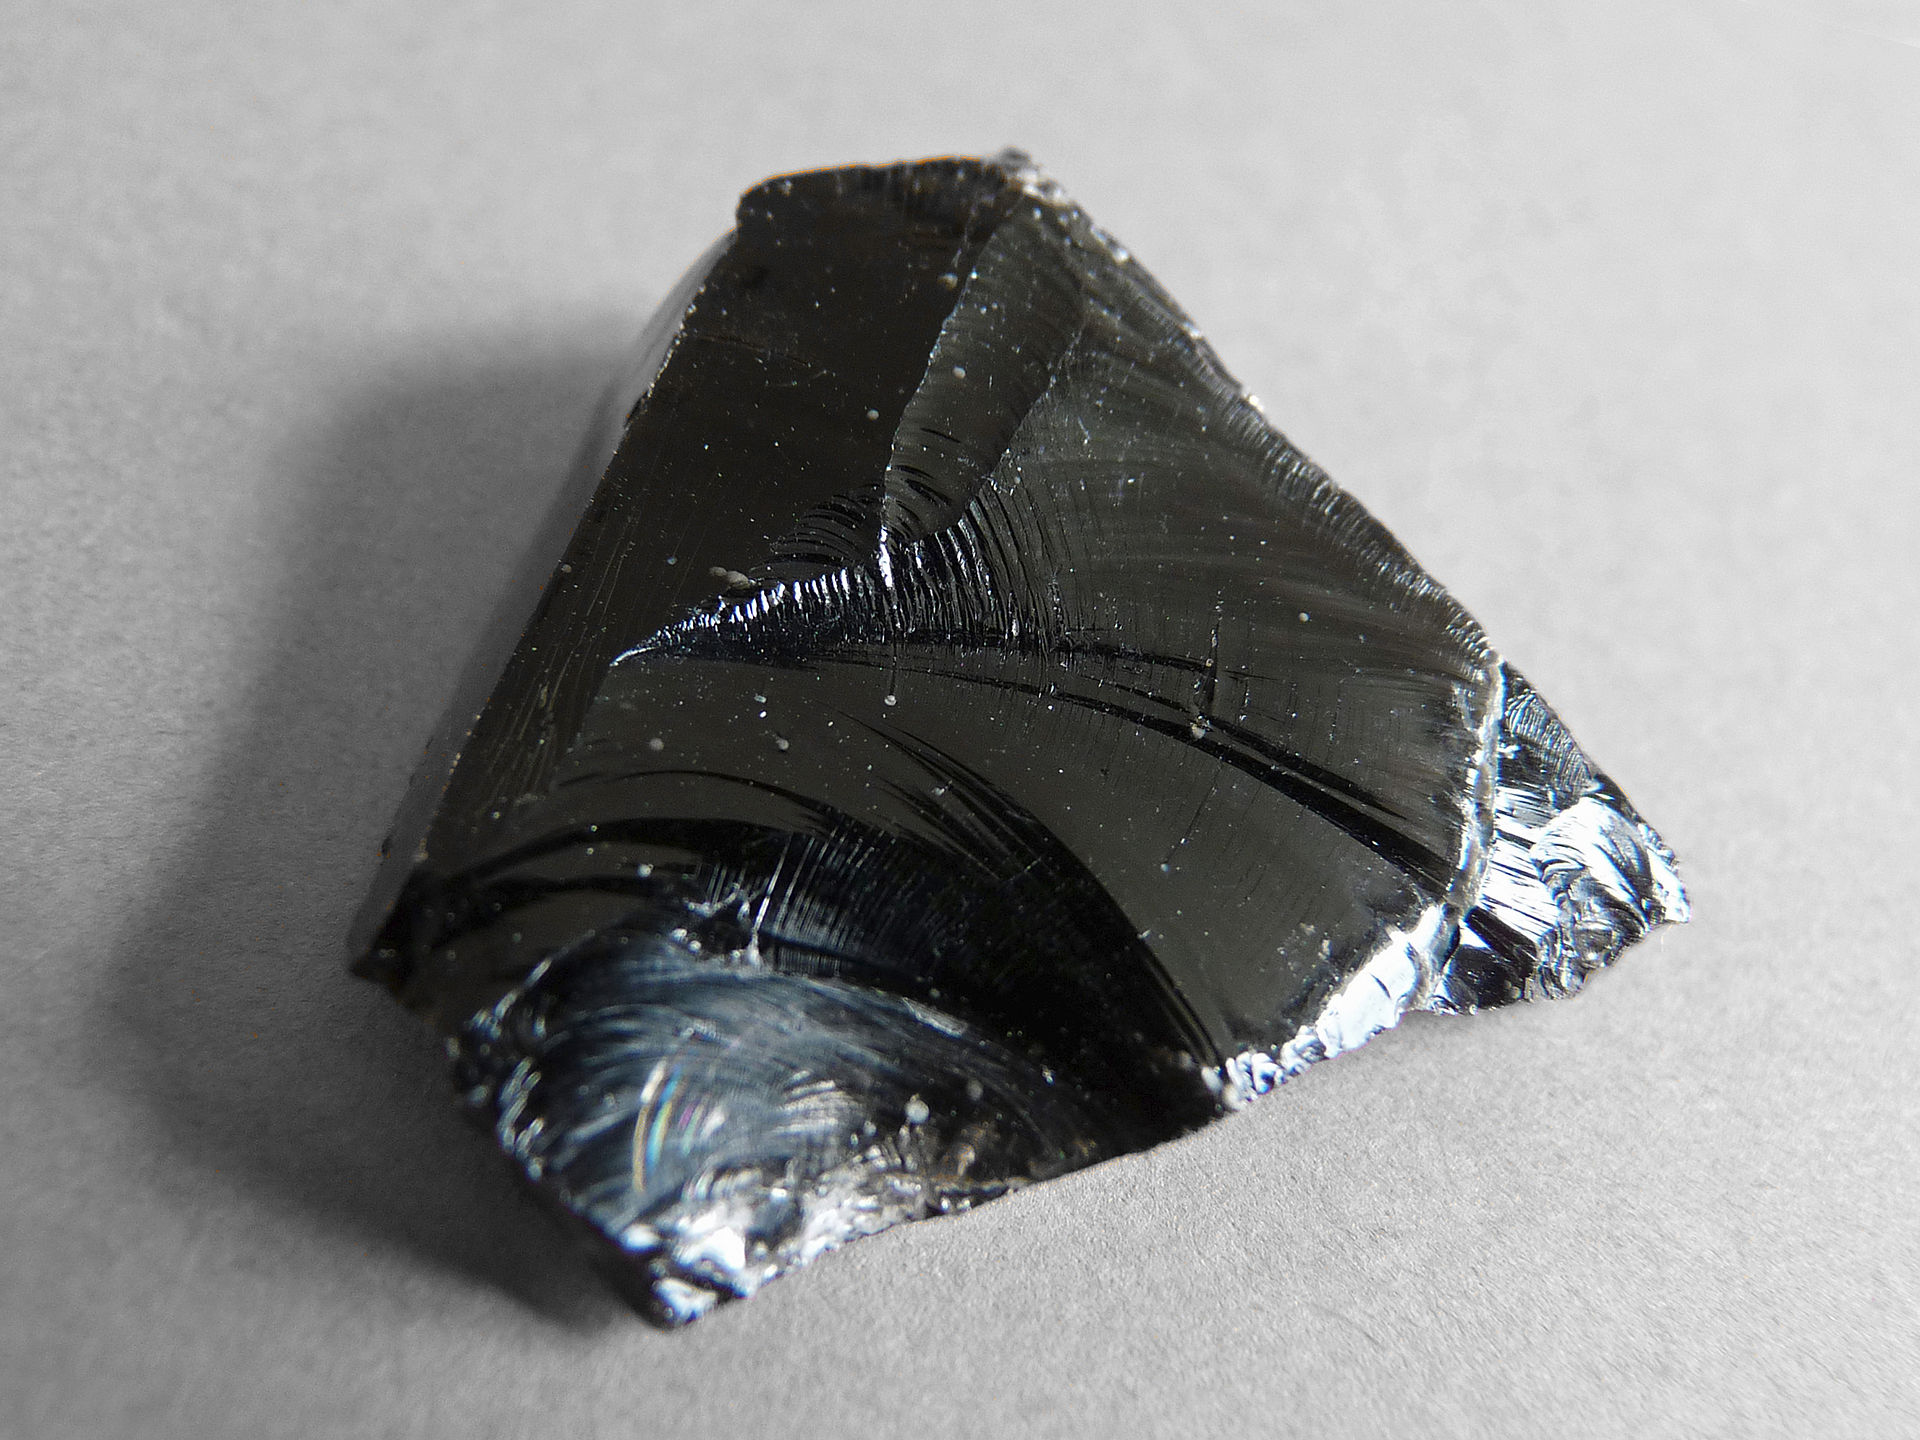 Photo of obsidian, a volcanic glass